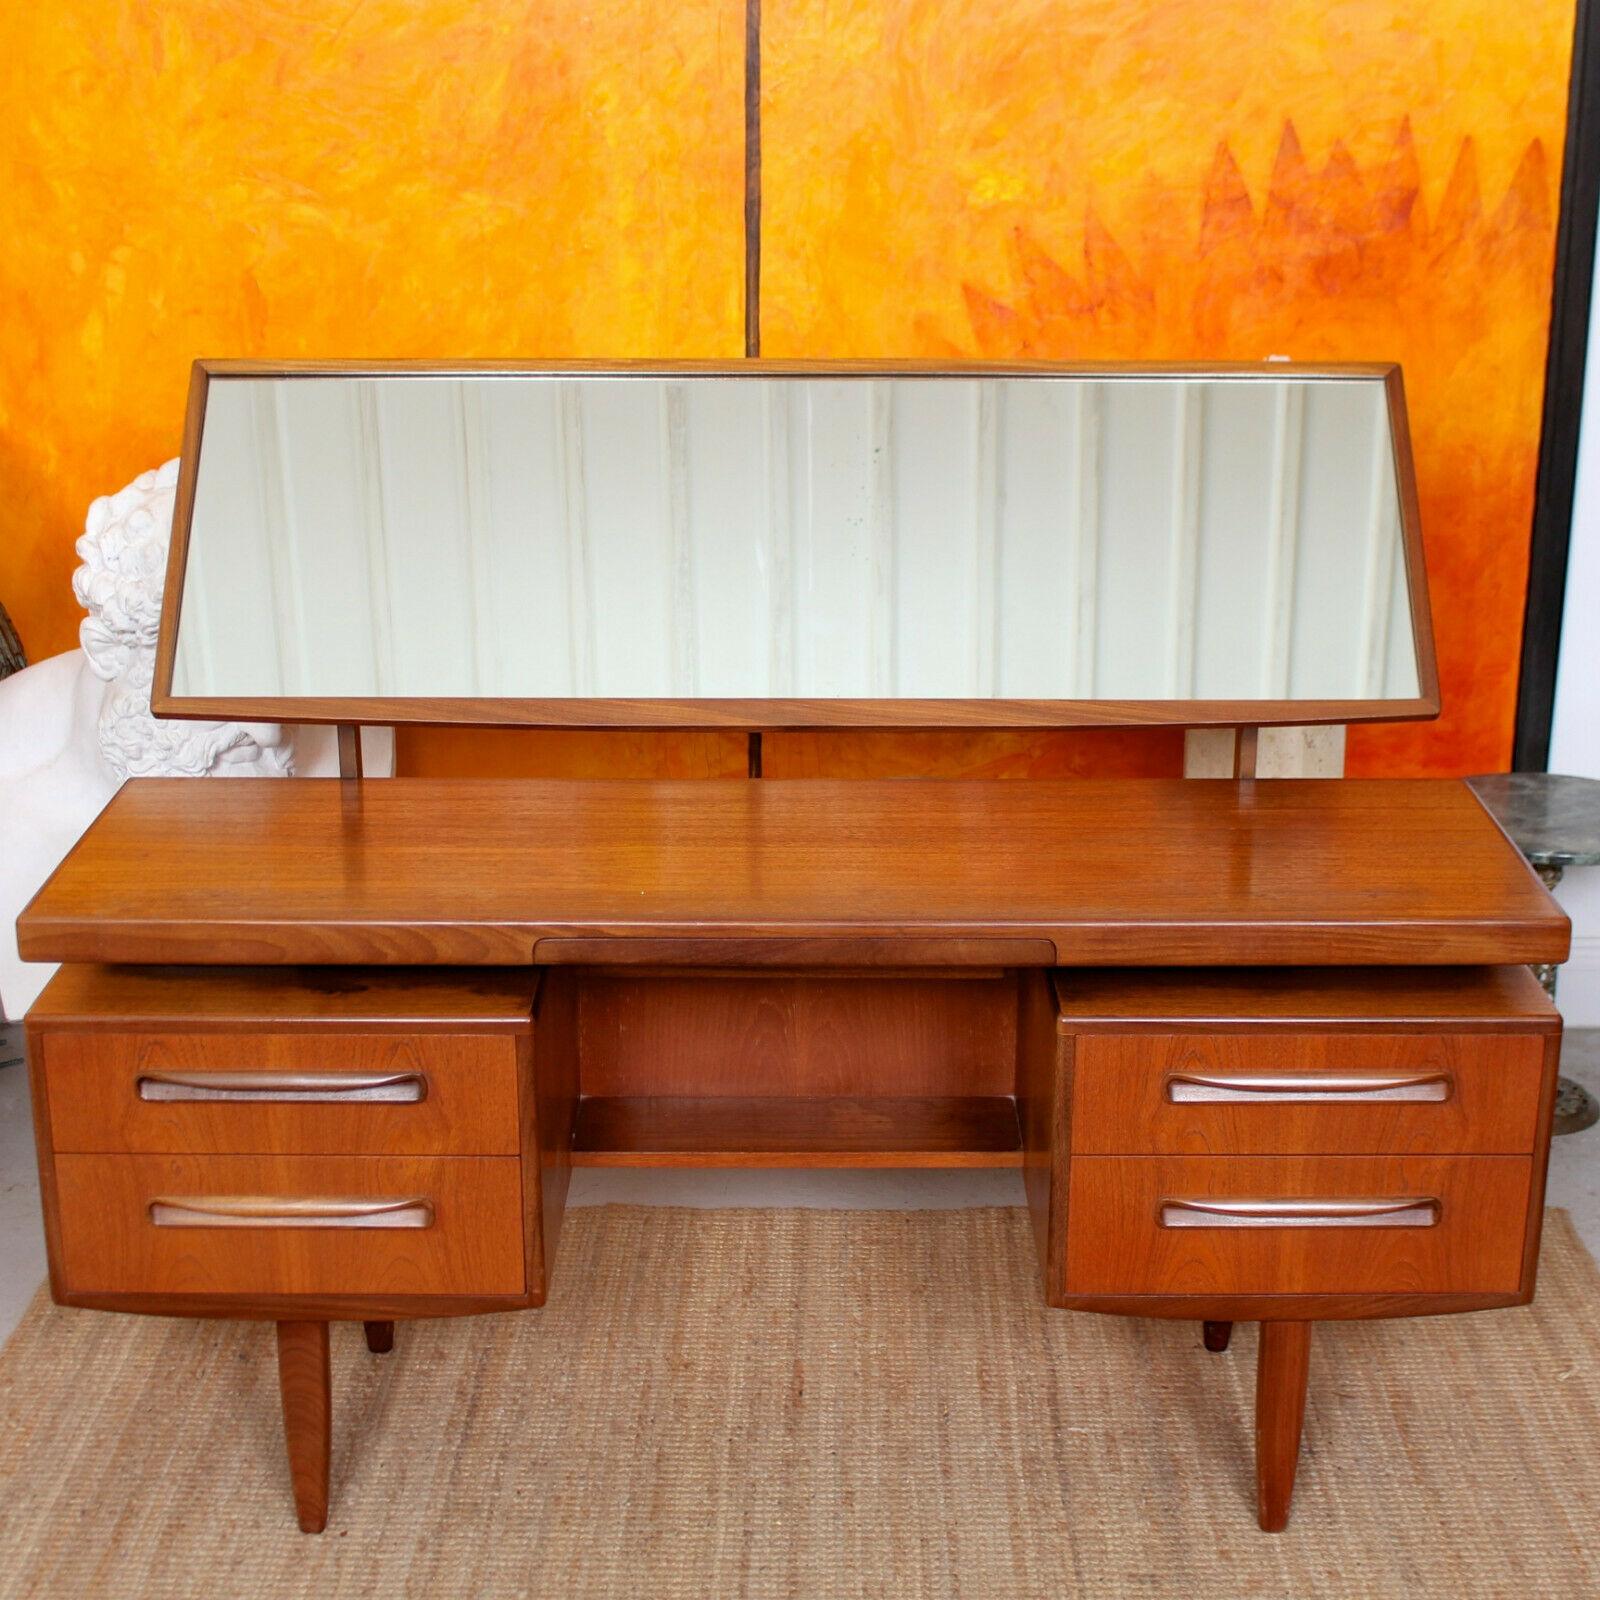 An impressive teak dressing table by G Plan from the companies iconic Fresco range.

Offered in good condition.